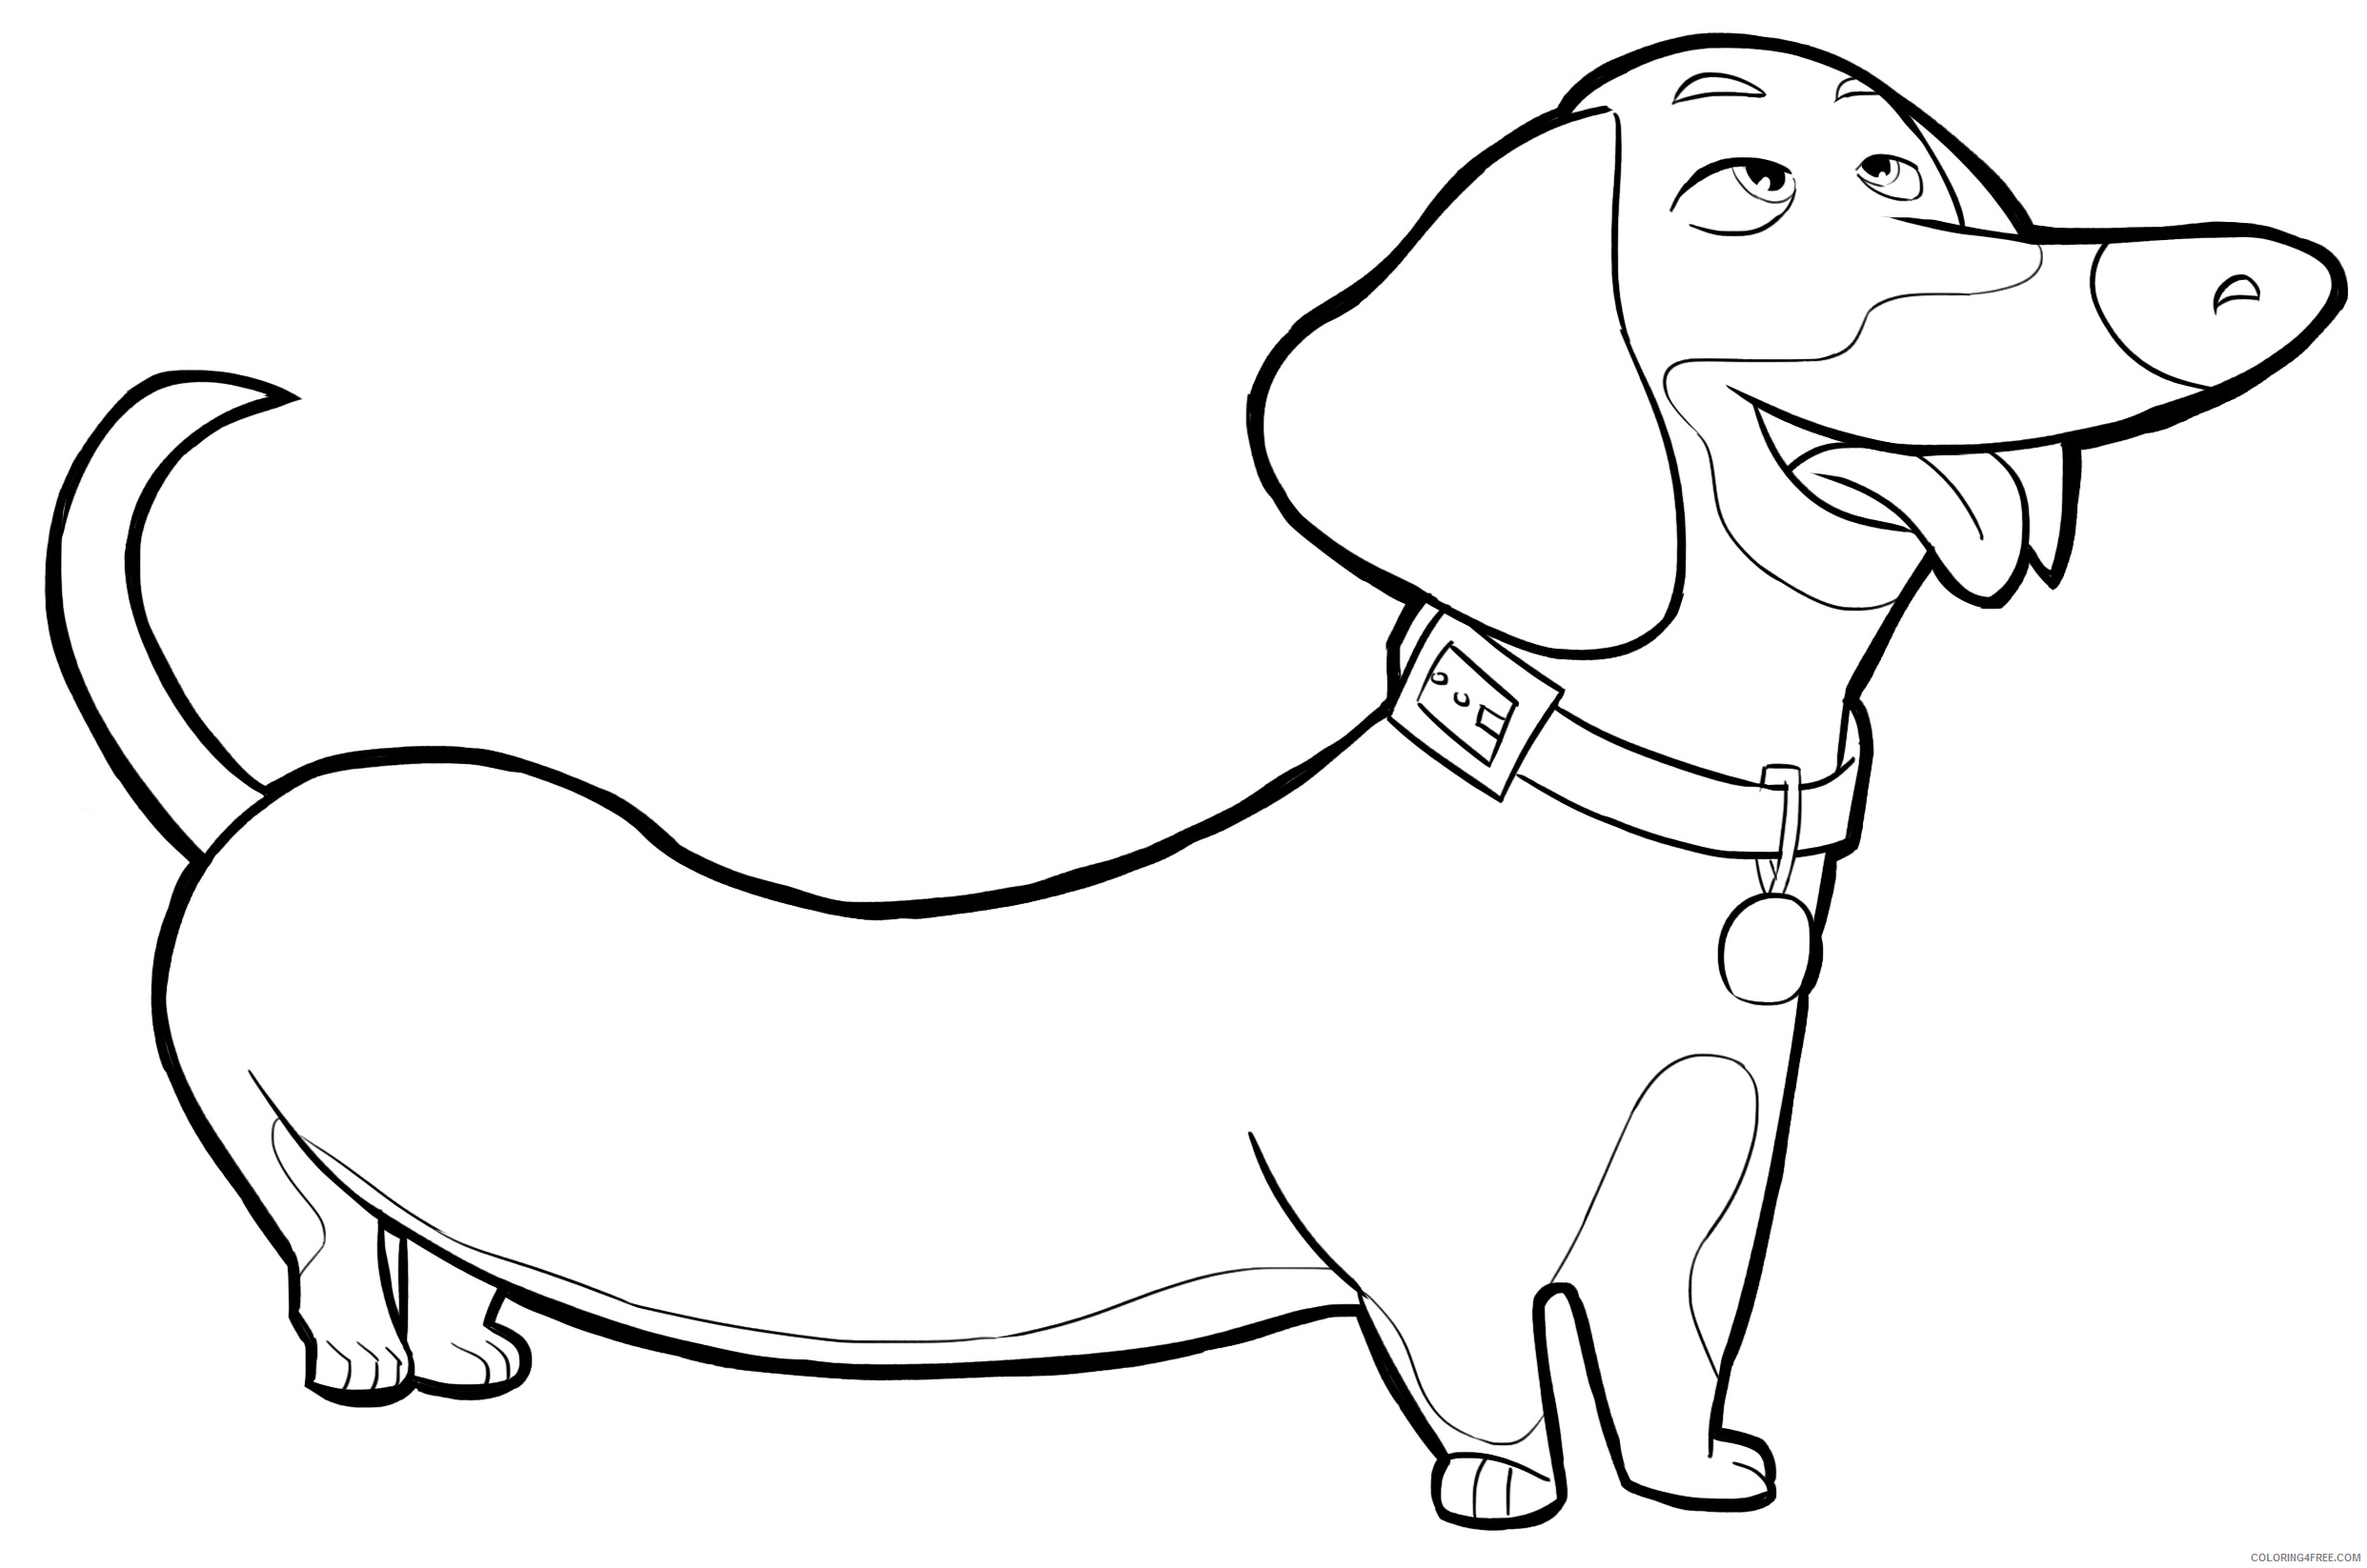 The Secret Life of Pets Coloring Pages TV Film Buddy rintable 2020 09482 Coloring4free